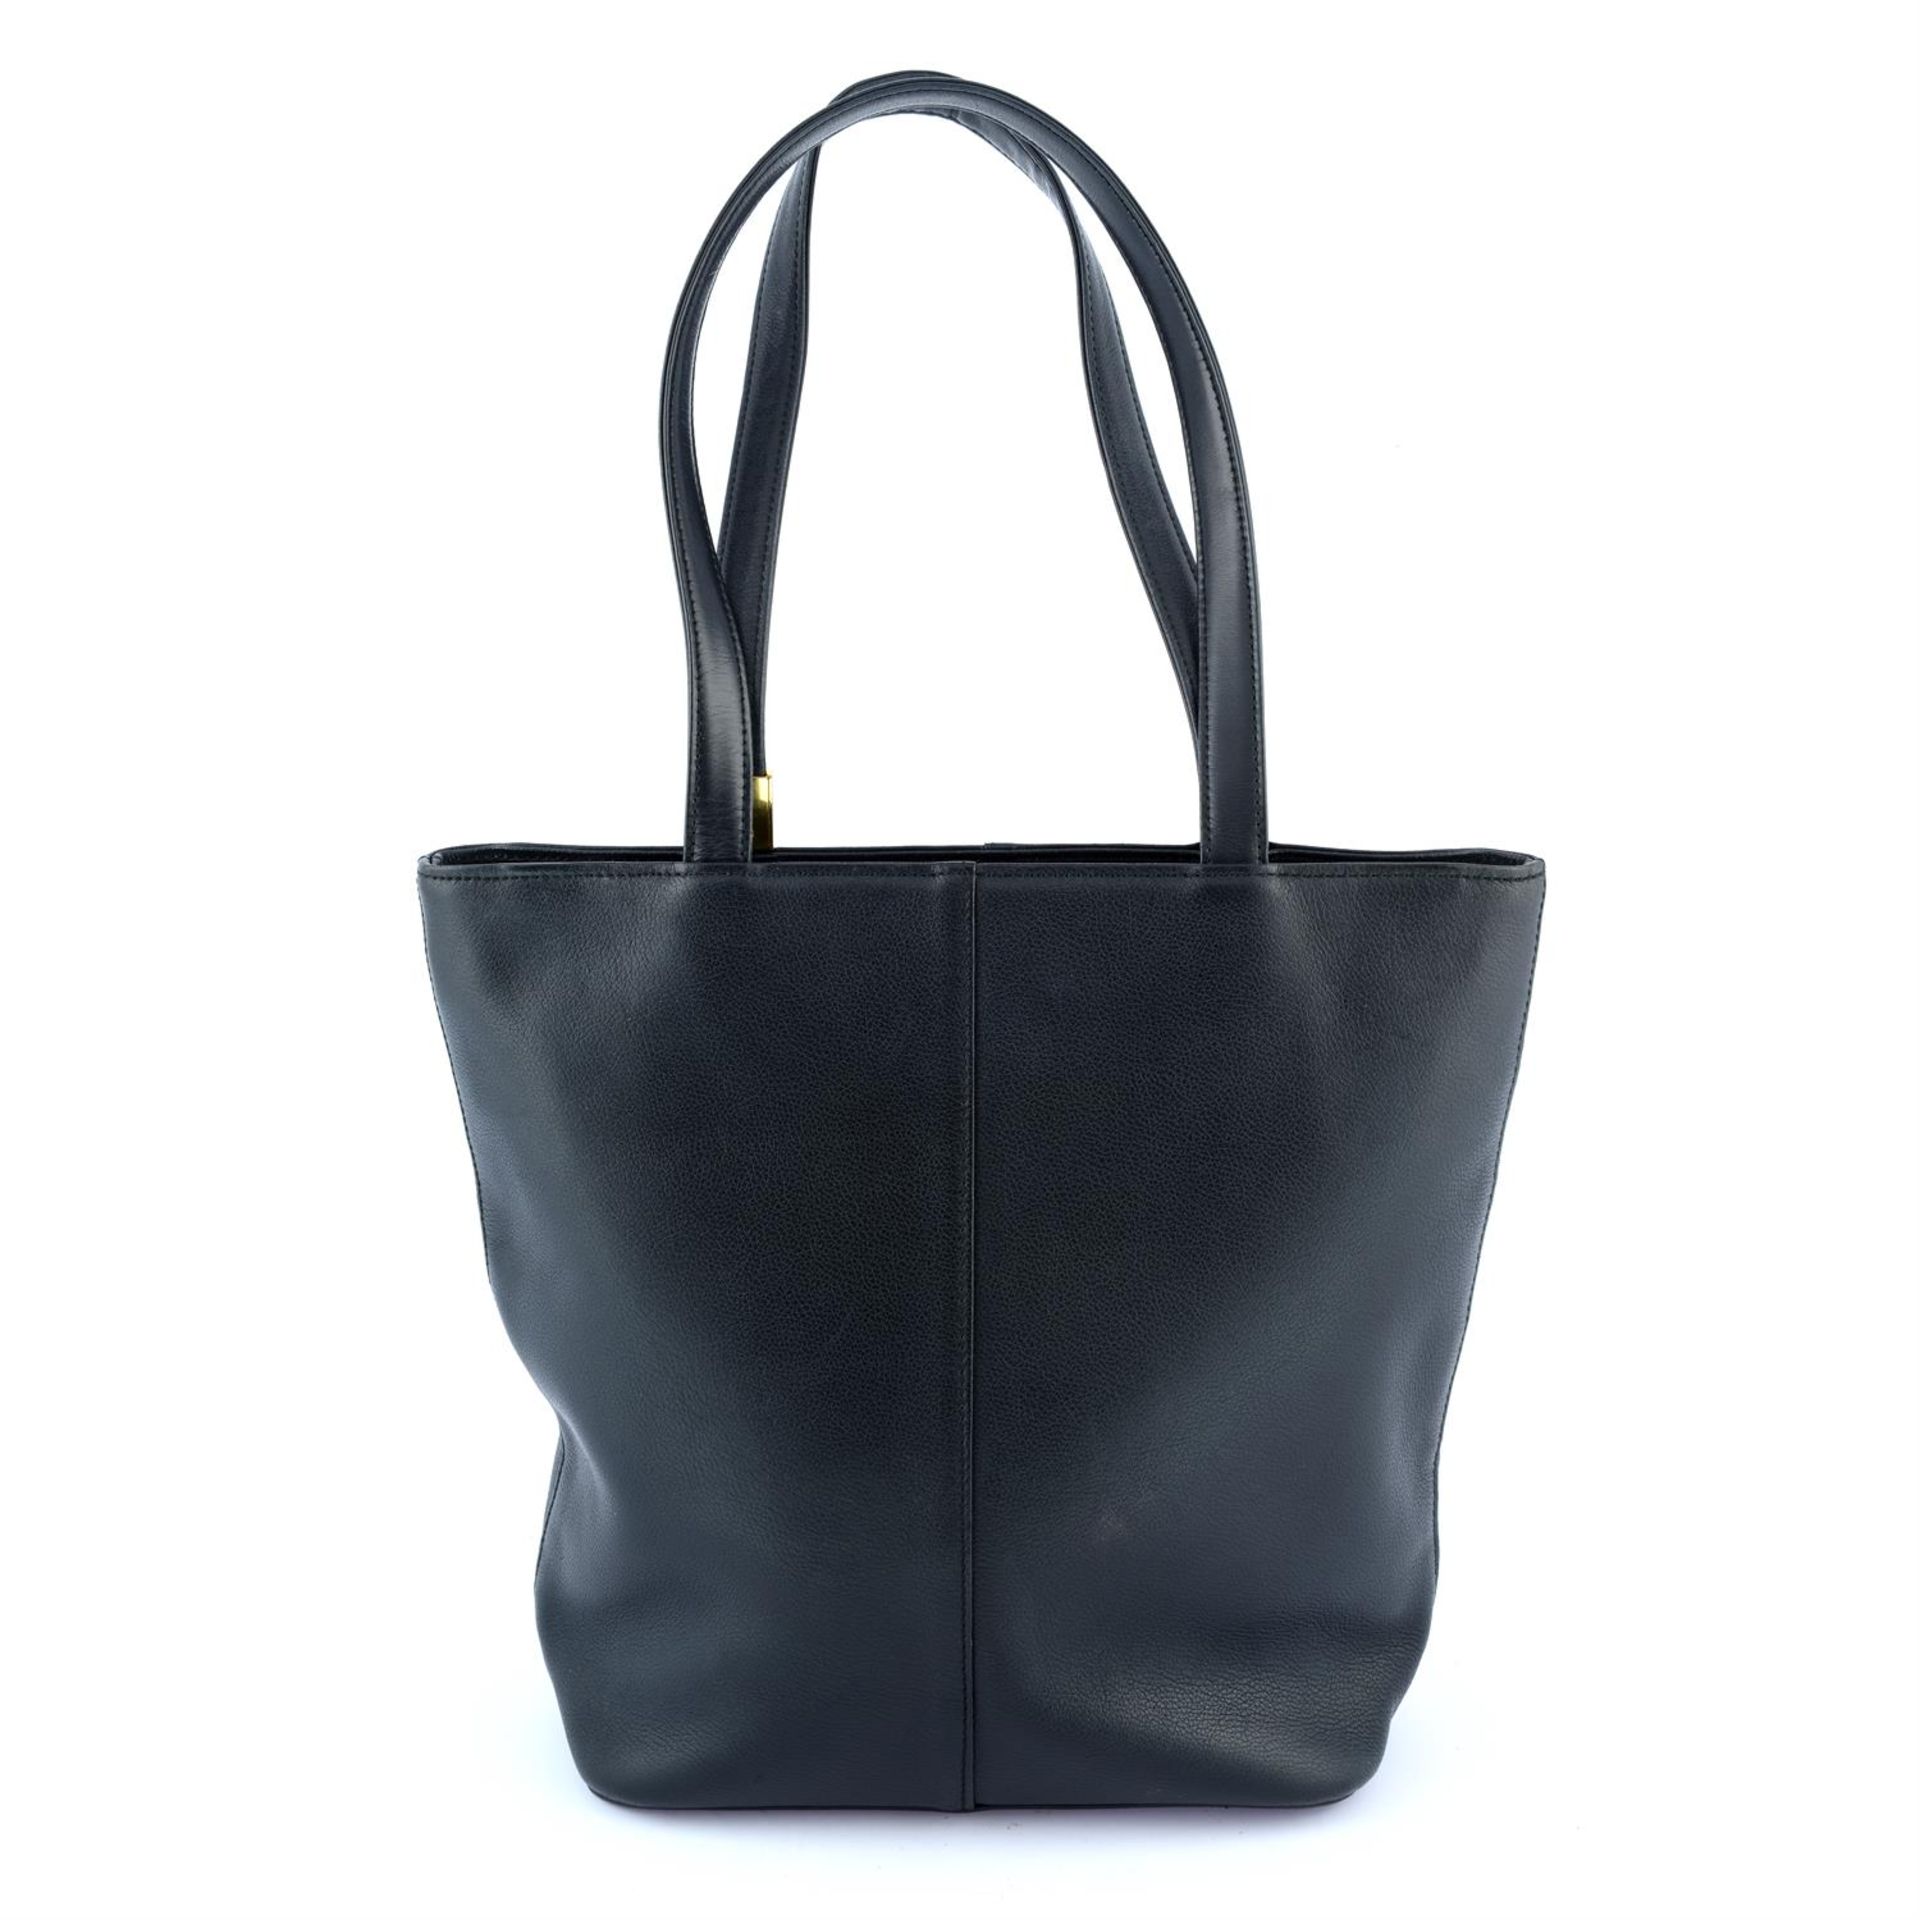 BURBERRY - a black leather tote. - Image 2 of 4